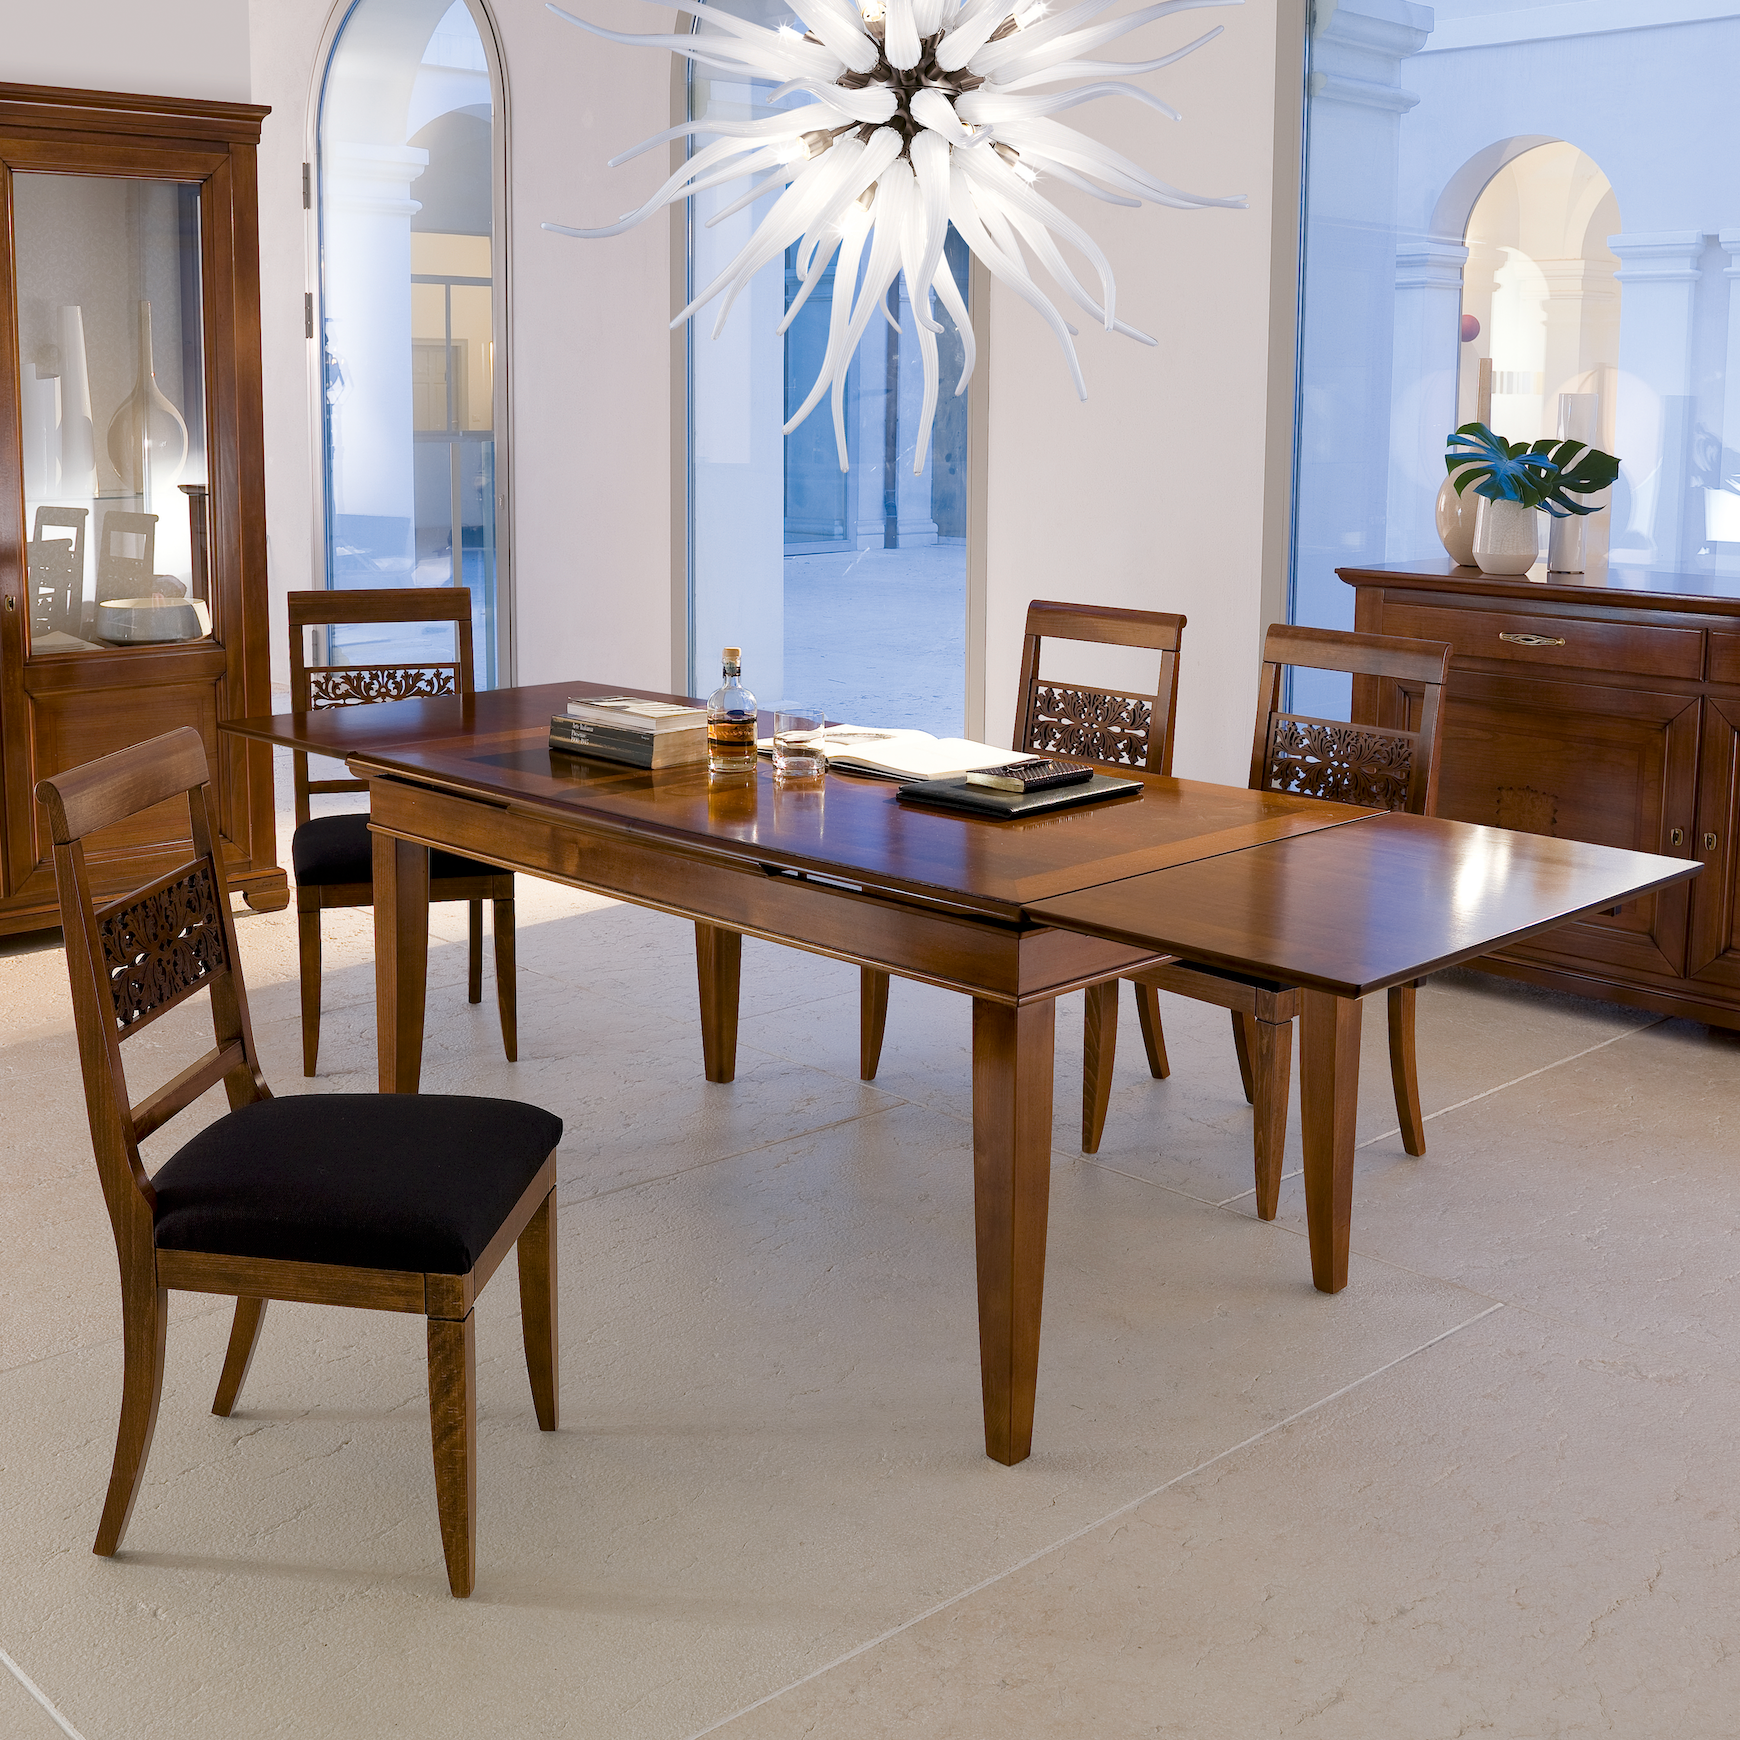 Classic Extendable Rectangular Table L 180 with 8 Classic Chairs in Cherry Wood and Real Leather Arte Piombini Collection